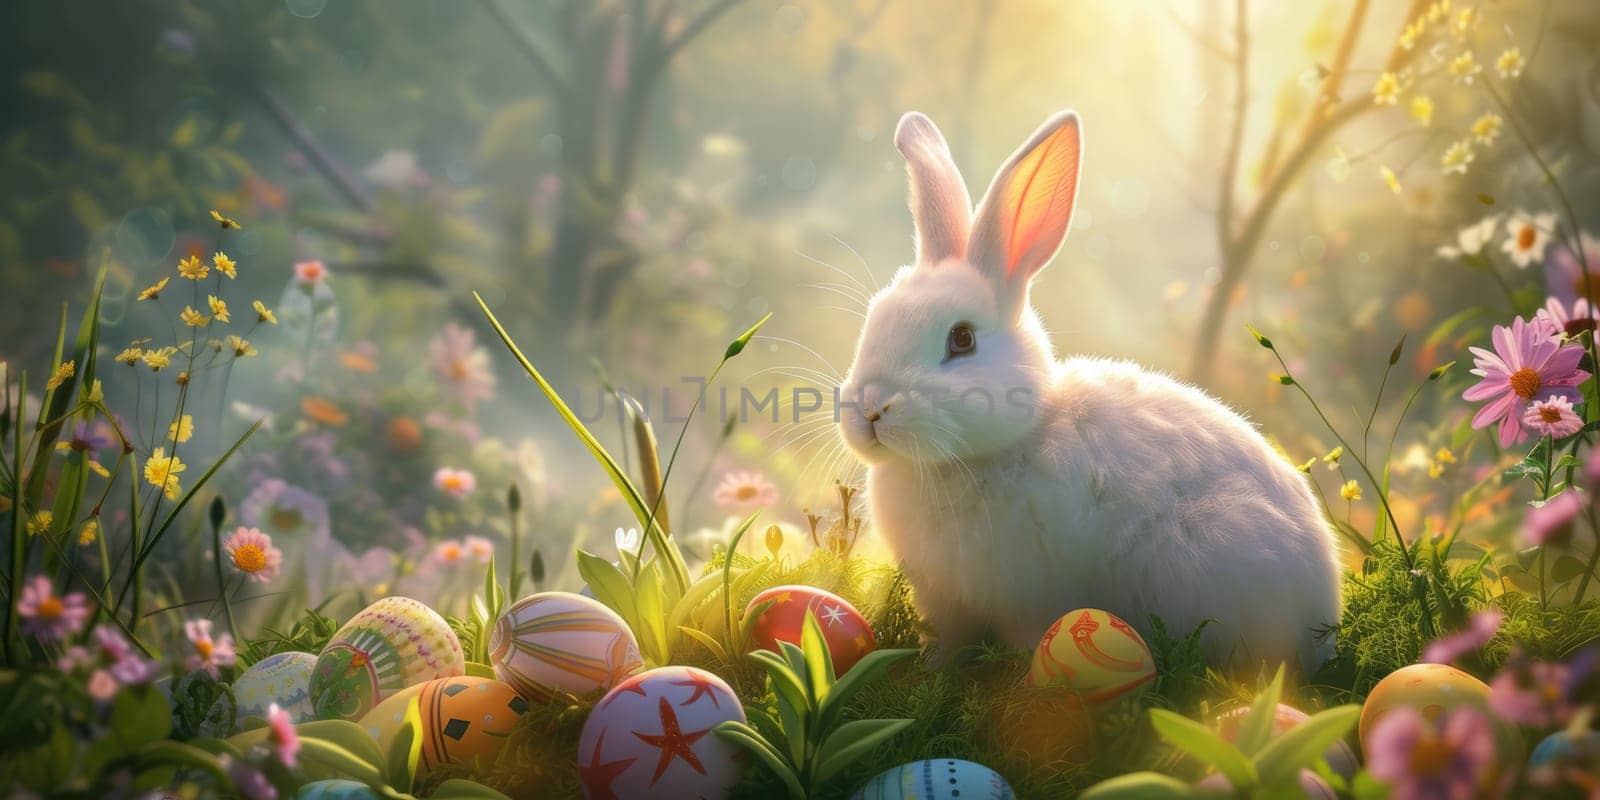 A happy rabbit is surrounded by Easter eggs in the grassy natural landscape AIG42E by biancoblue